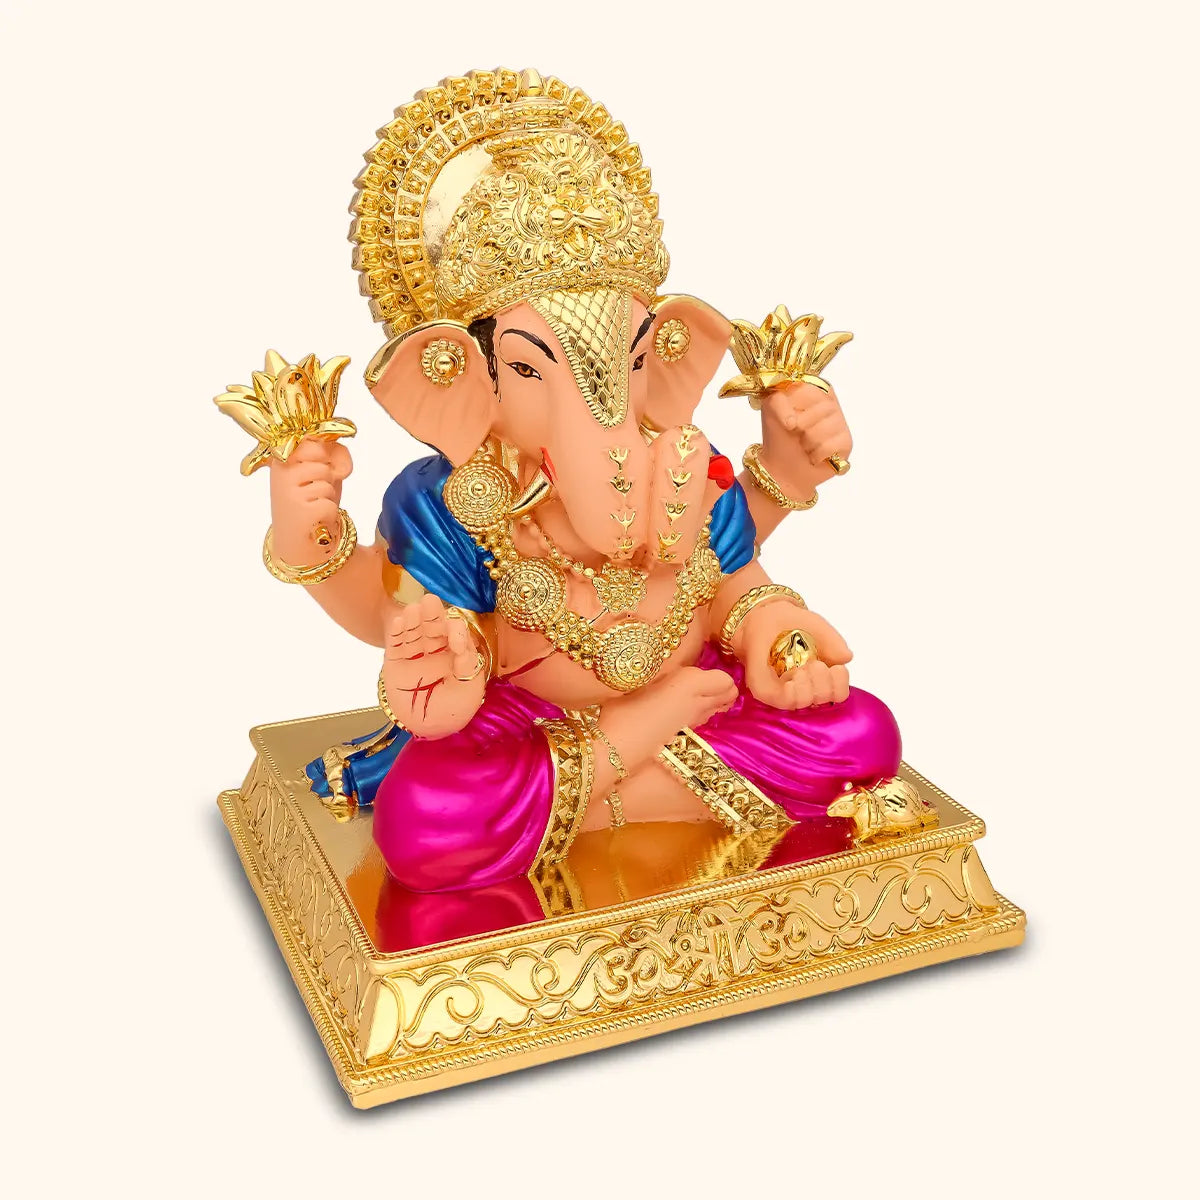 Lord Ganesha Sculpture Wholesale Supplier in India Buy Return Gifts on